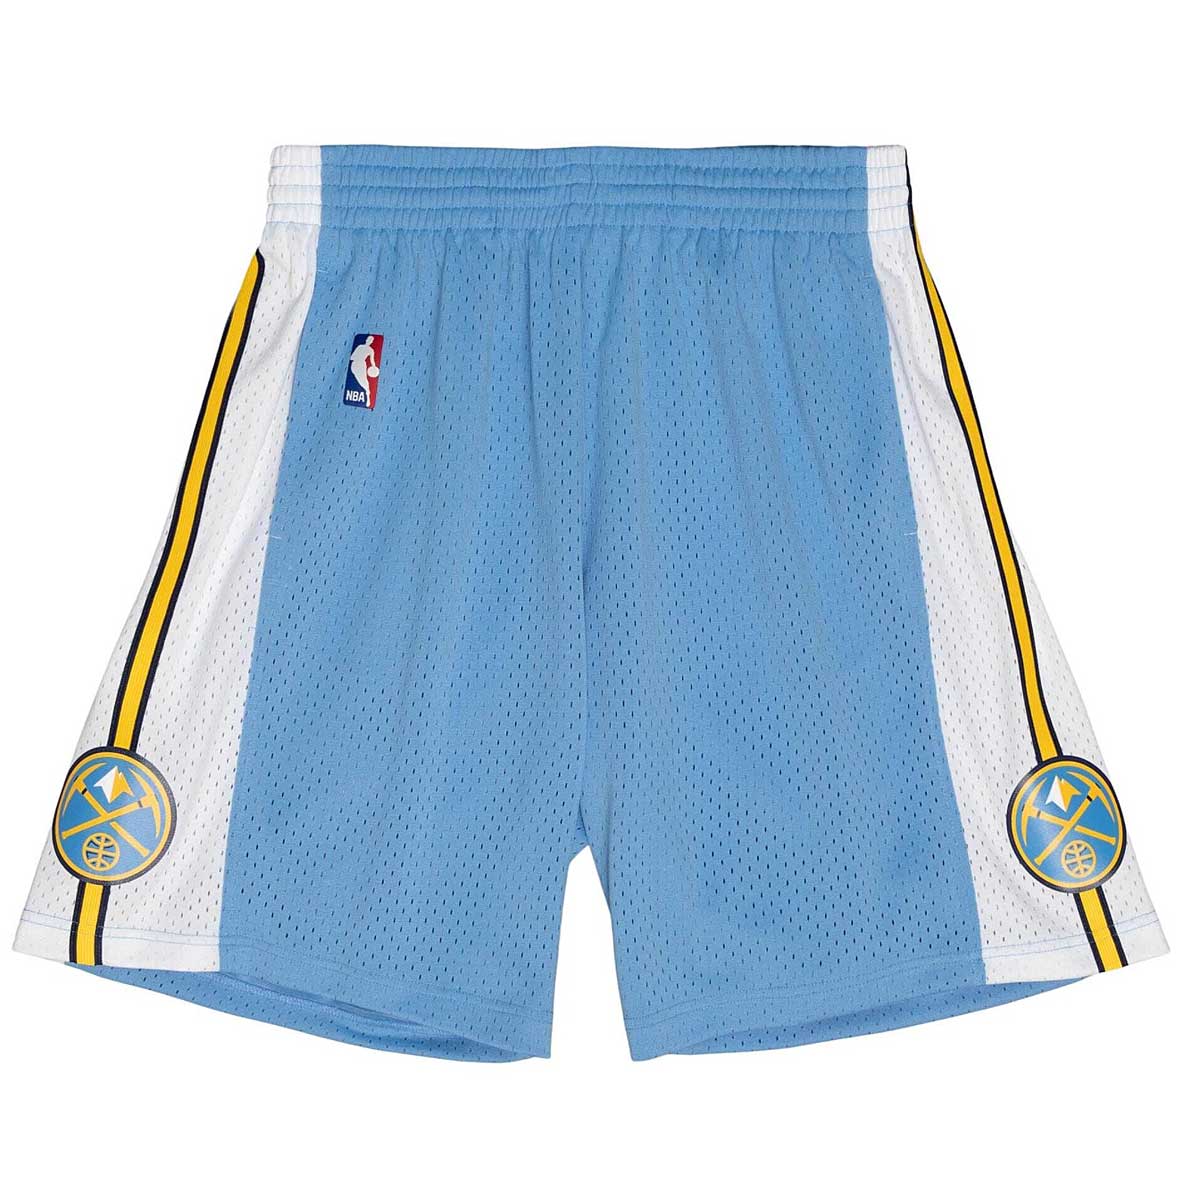 Mitchell And Ness Nba Denver Nuggets 2016 Road Swingman Shorts, Columbia Blue